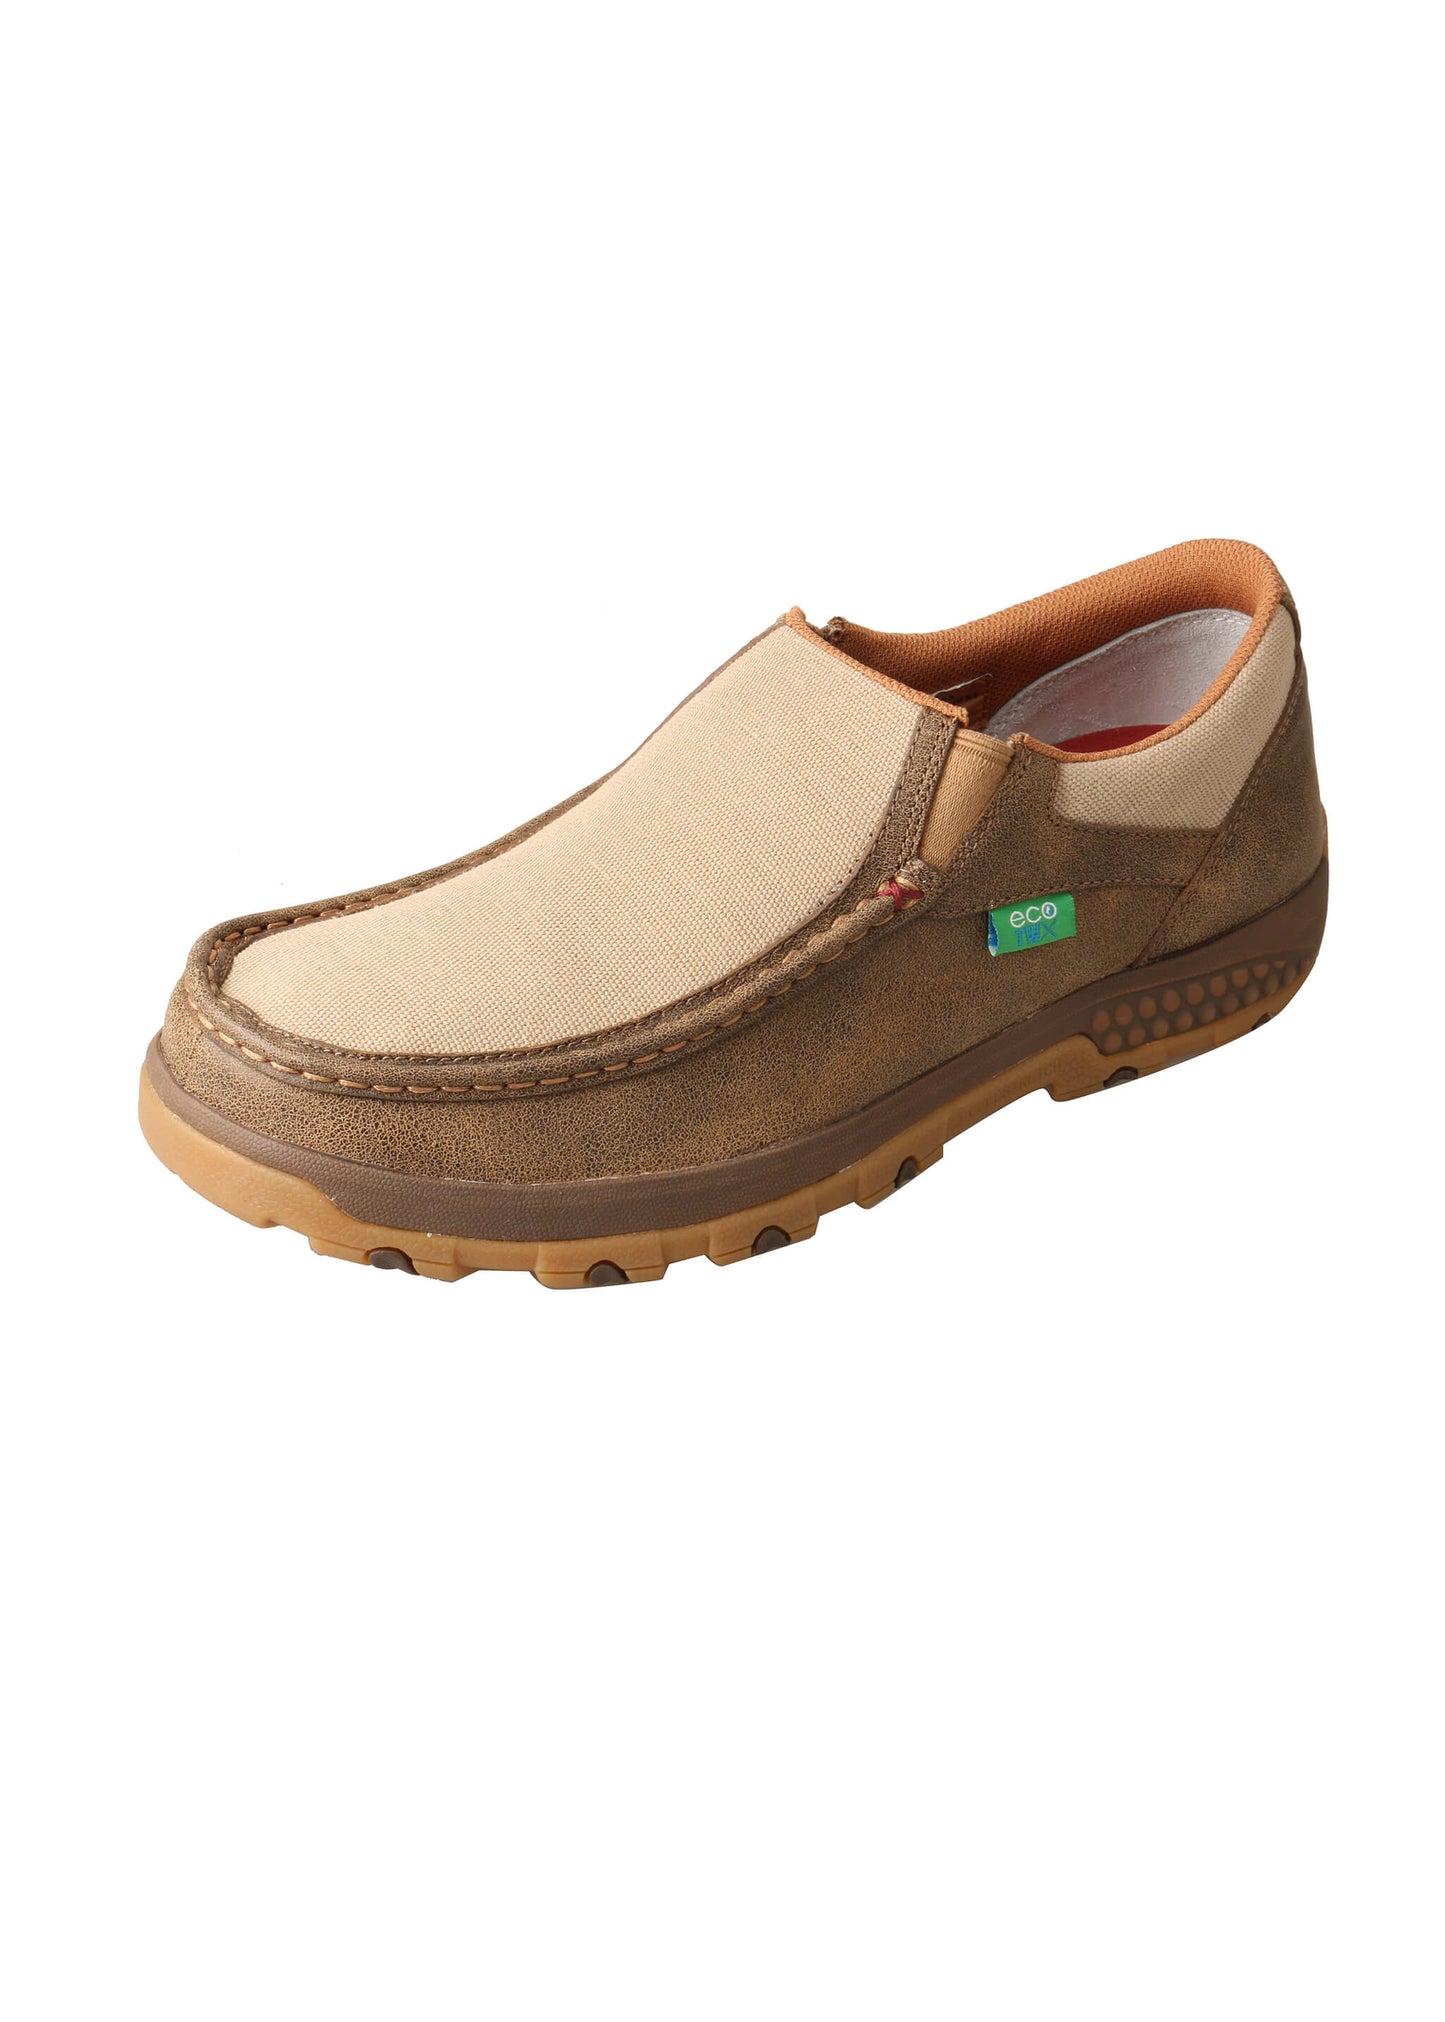 Men's Twisted X Eco Bomber Cellstretch Mocs